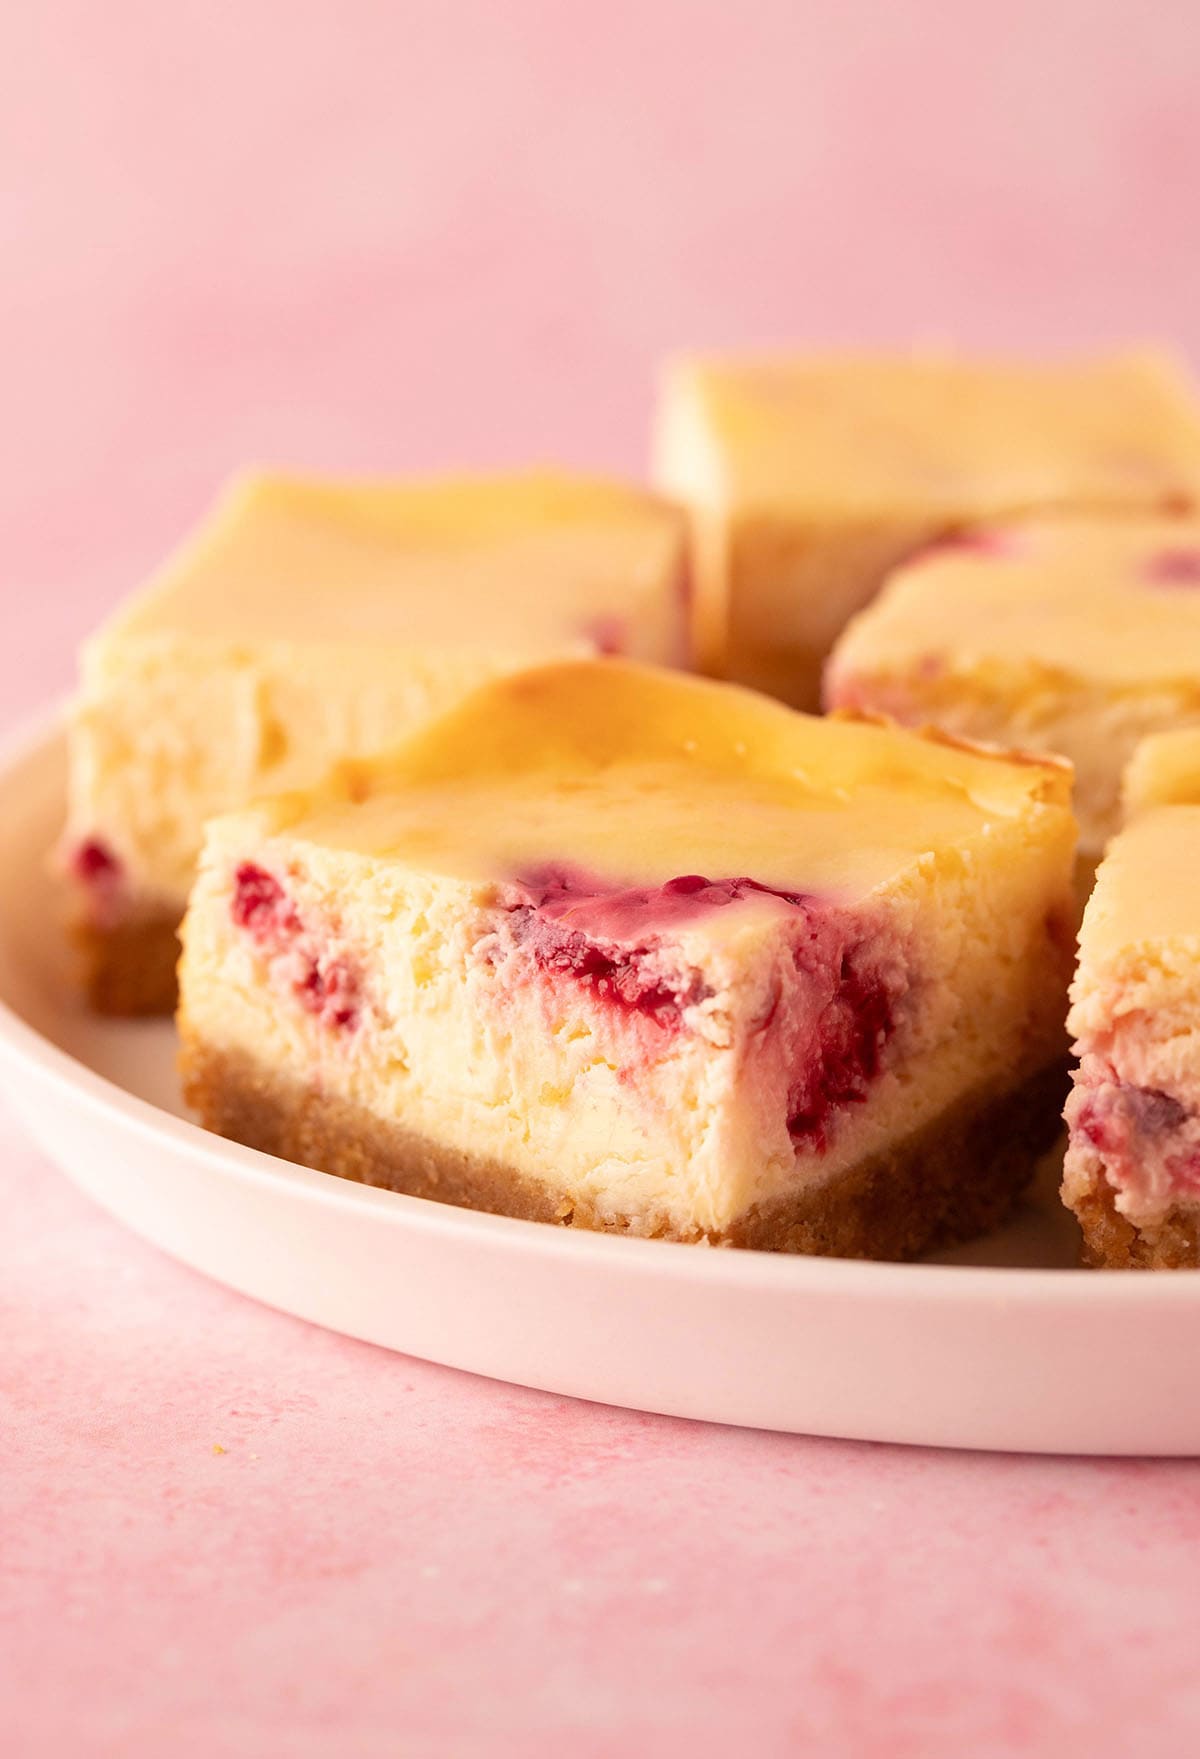 A plate of cheesecake bars filled with raspberries.